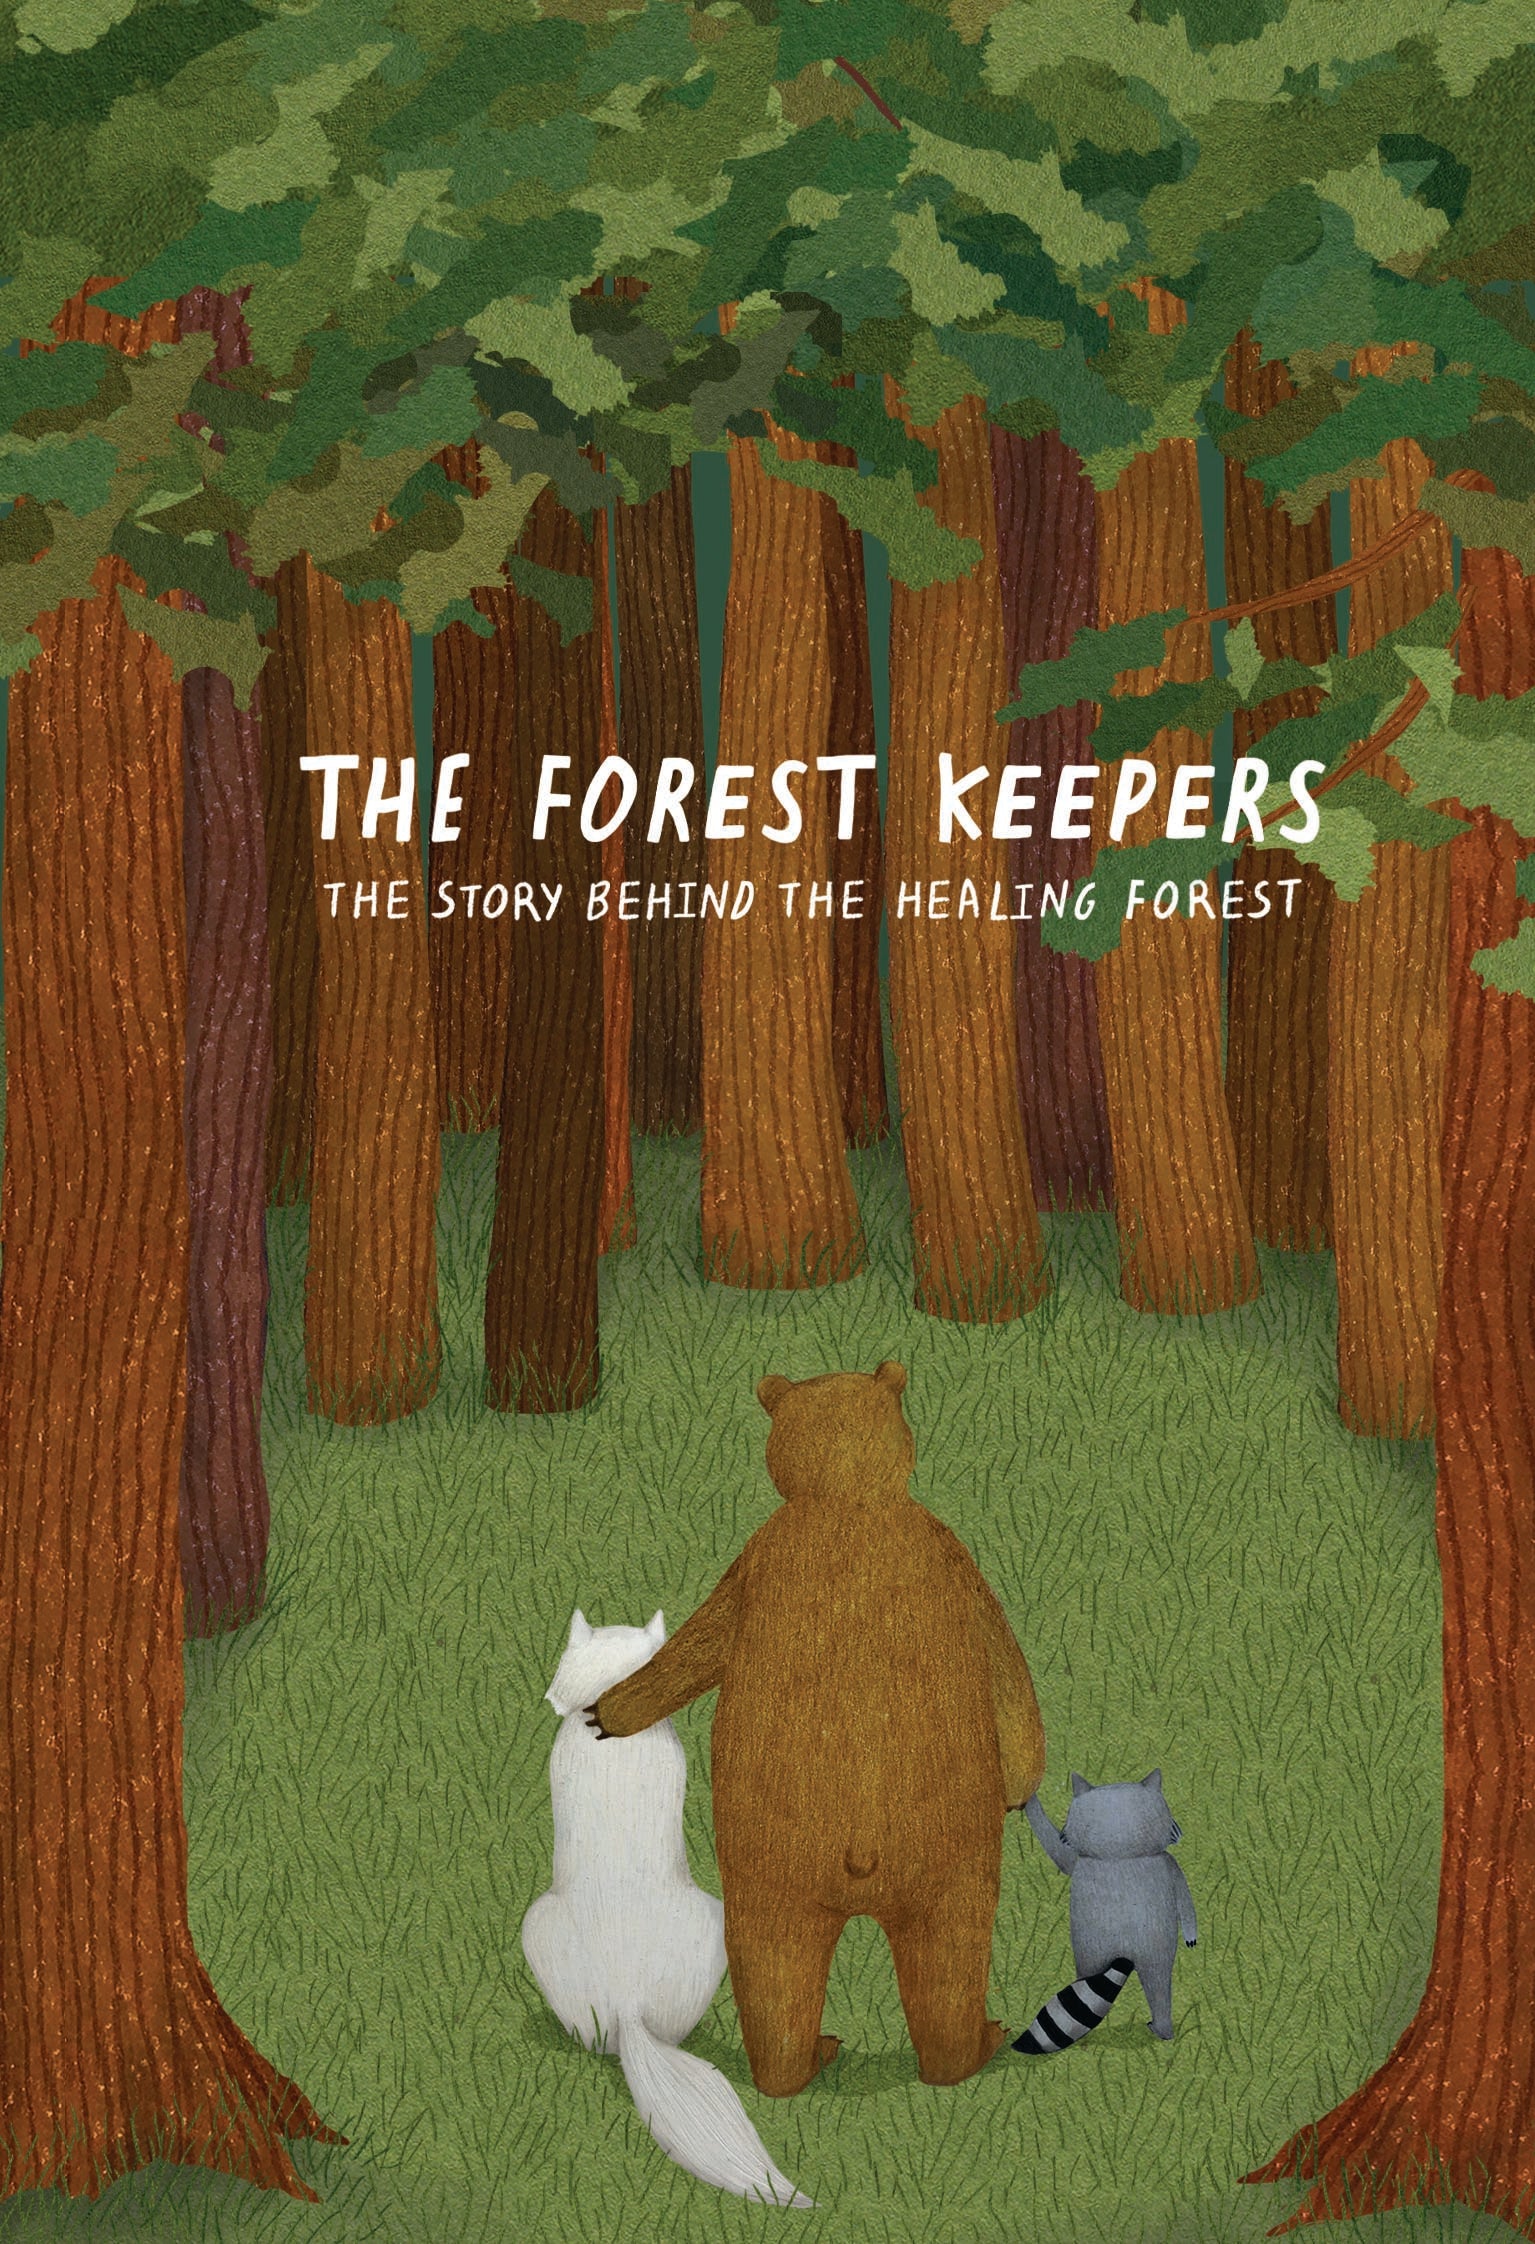 THE FOREST KEEPERS